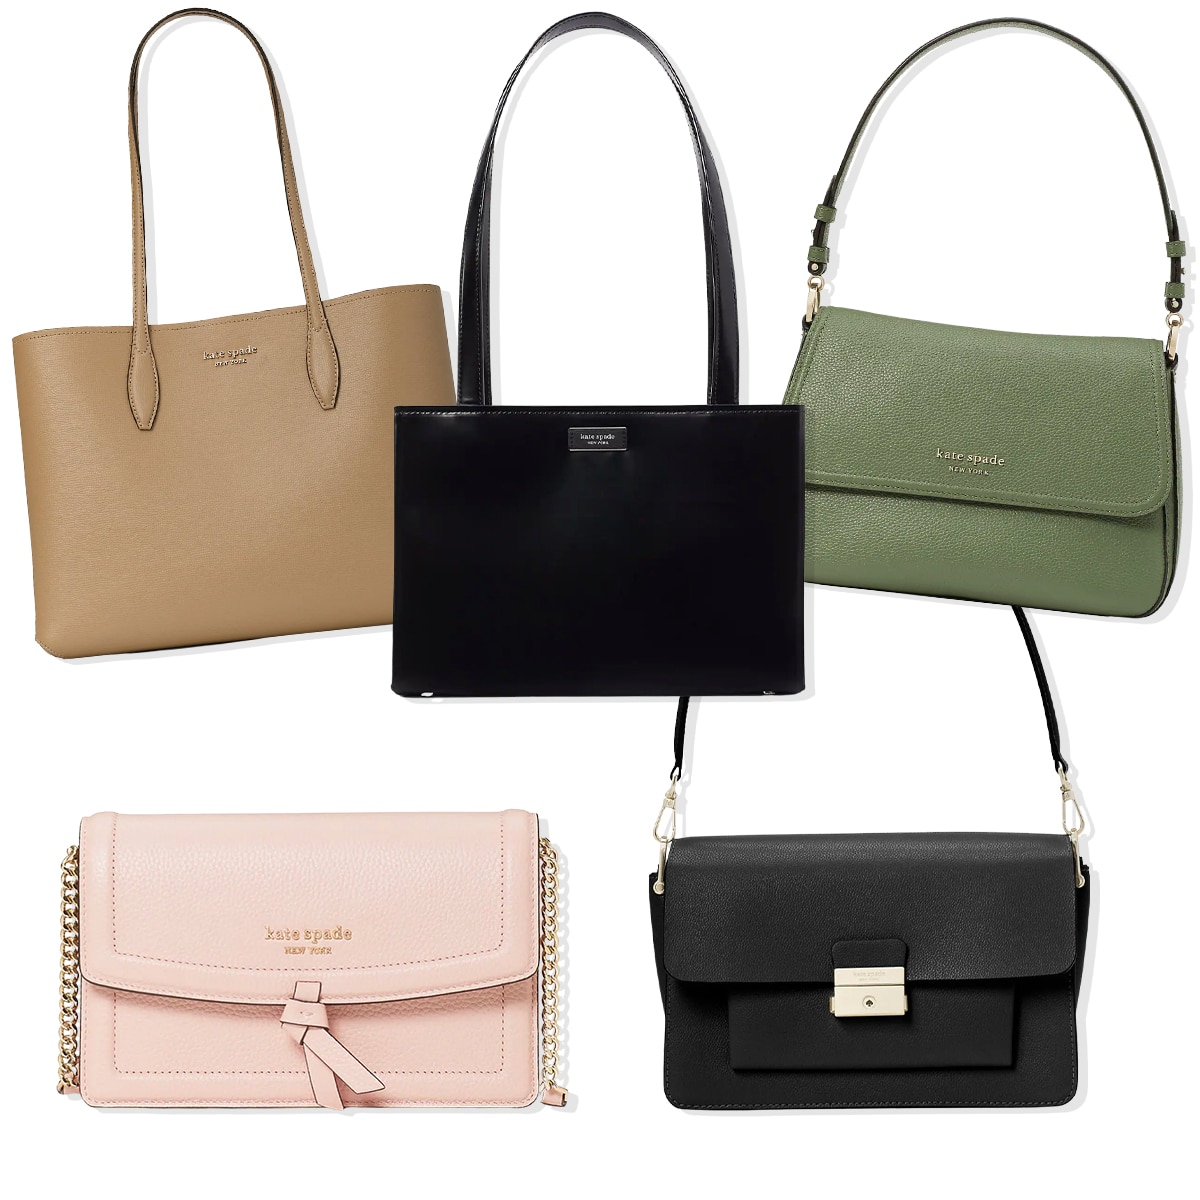 Kate Spade's Massive Extra 40% Off Sale Has a $248 Tote Bag for 